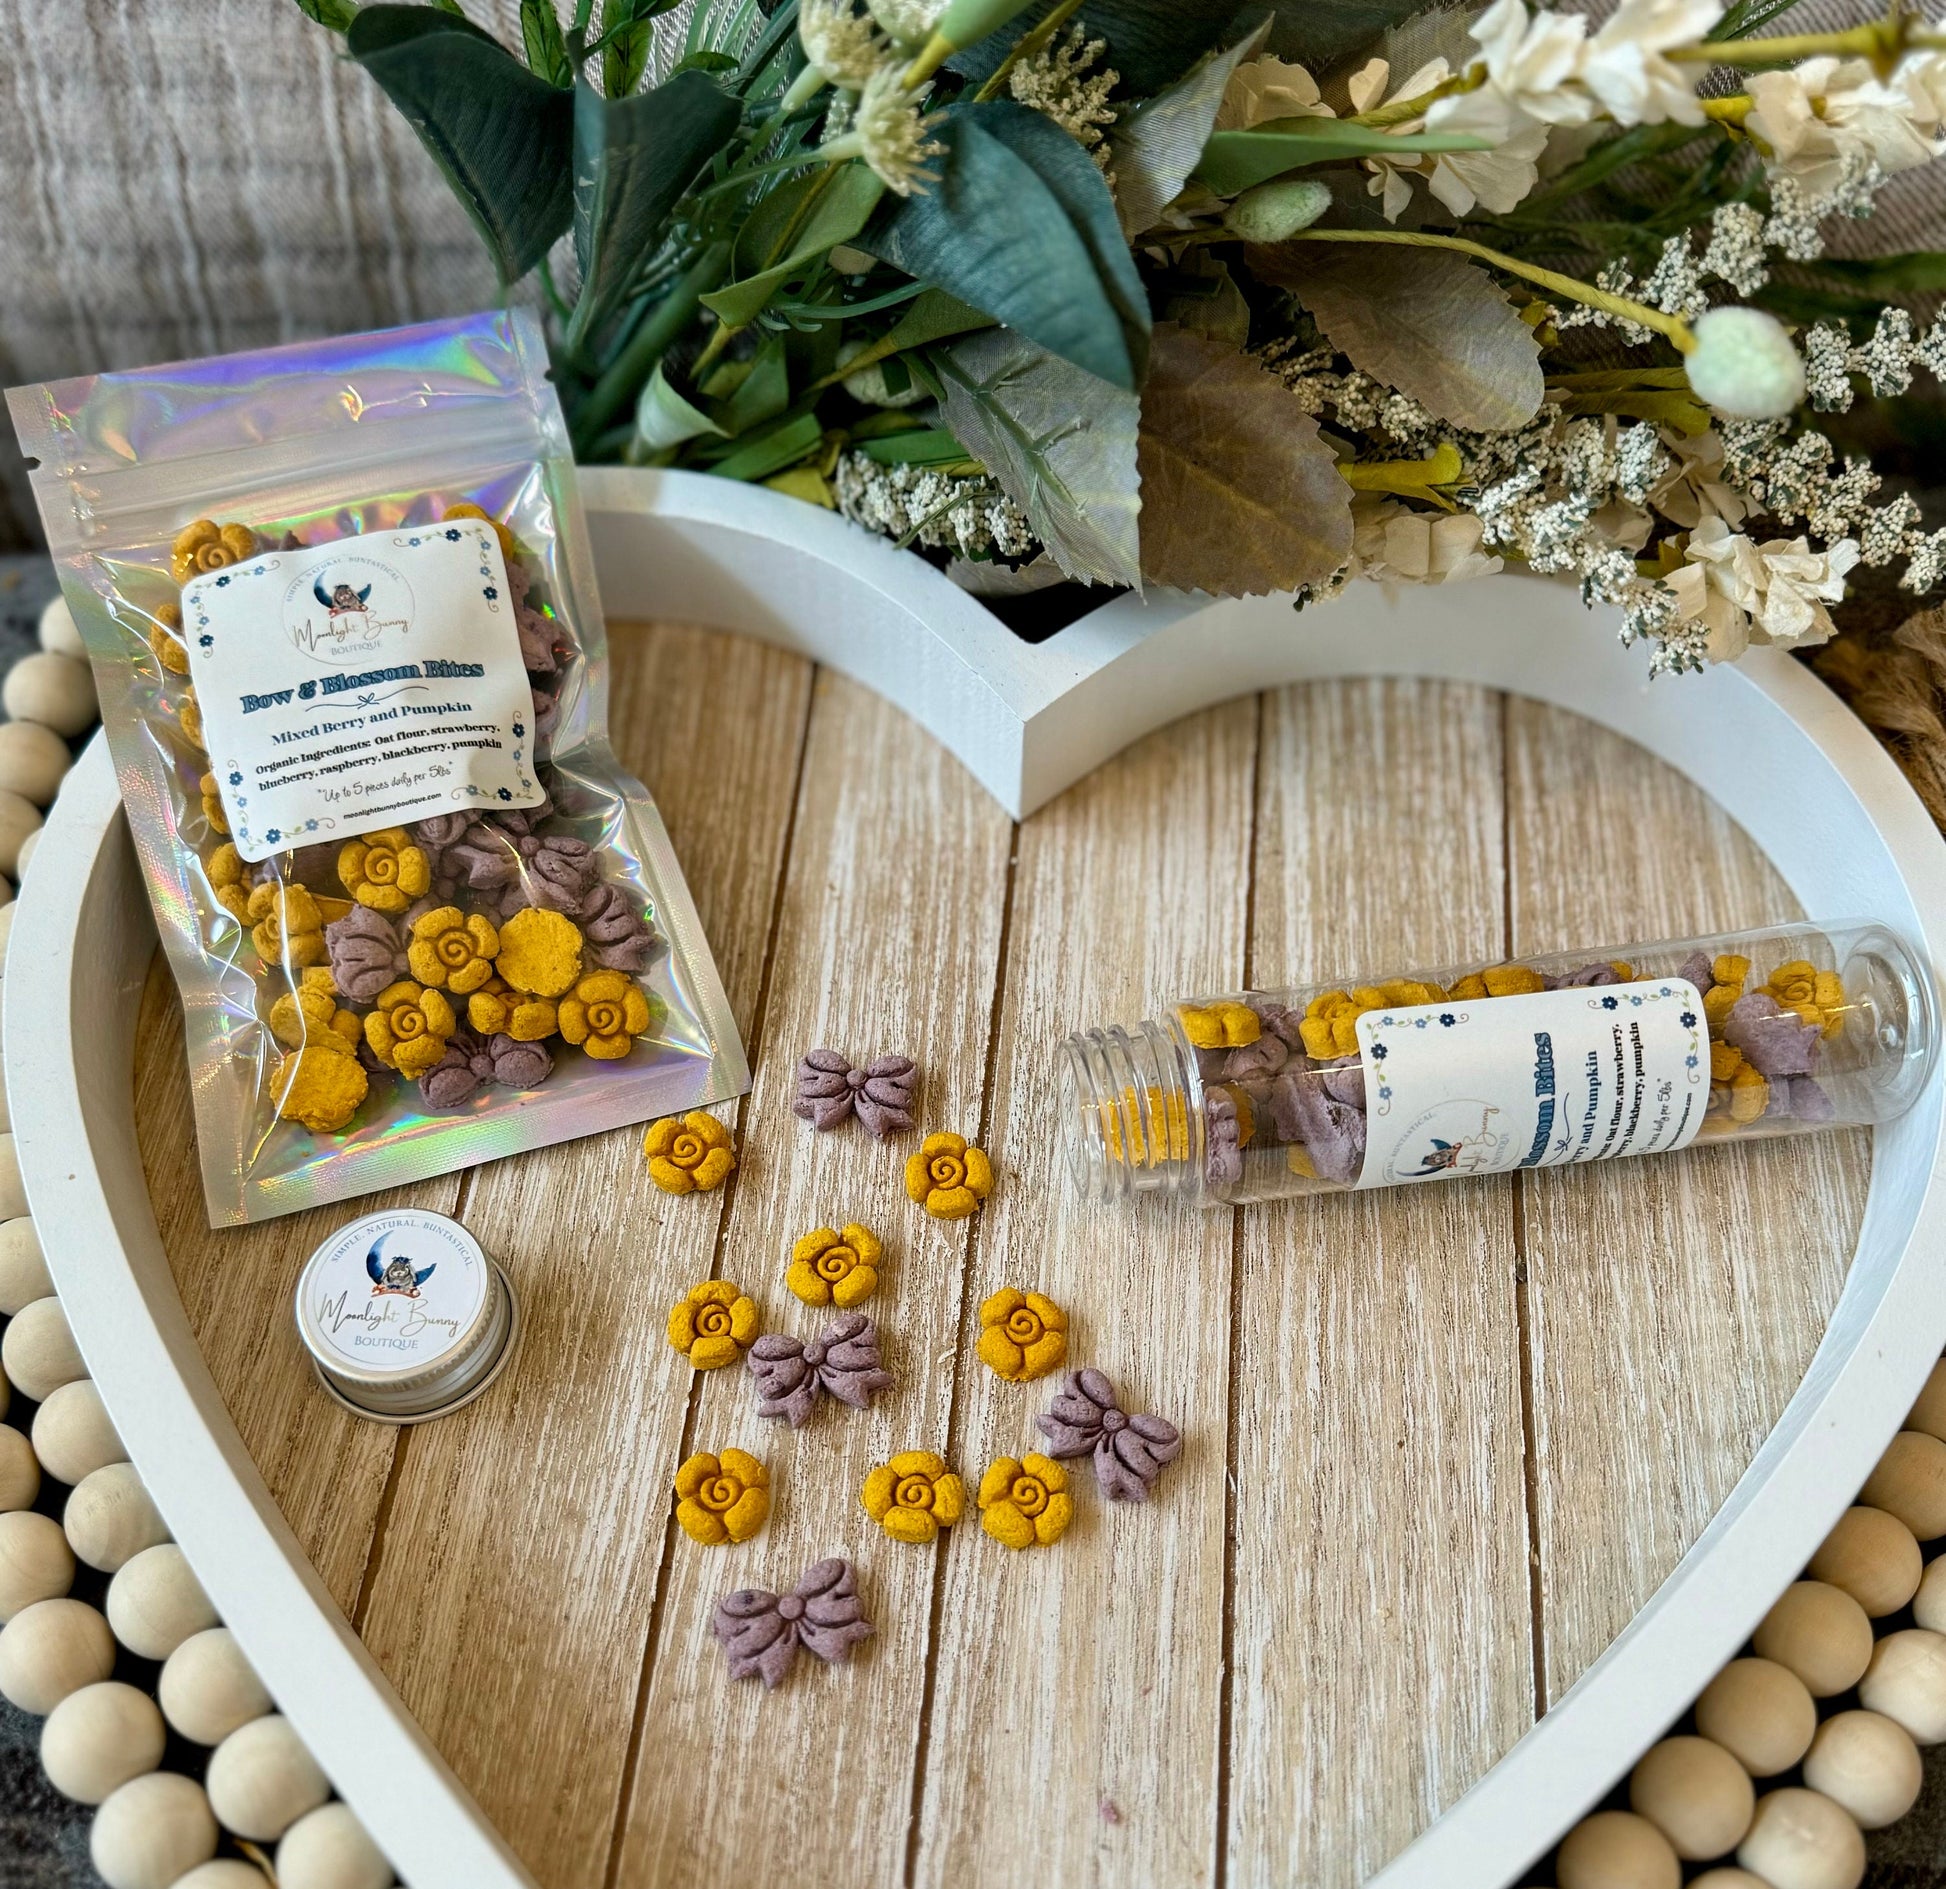 Bow and Blossom Bites | 55+ Delicious Bite Sized Treats for Rabbits, Guinea Pigs, Hamsters, Mice, and Small Pets, Natural, Healthy & Organic